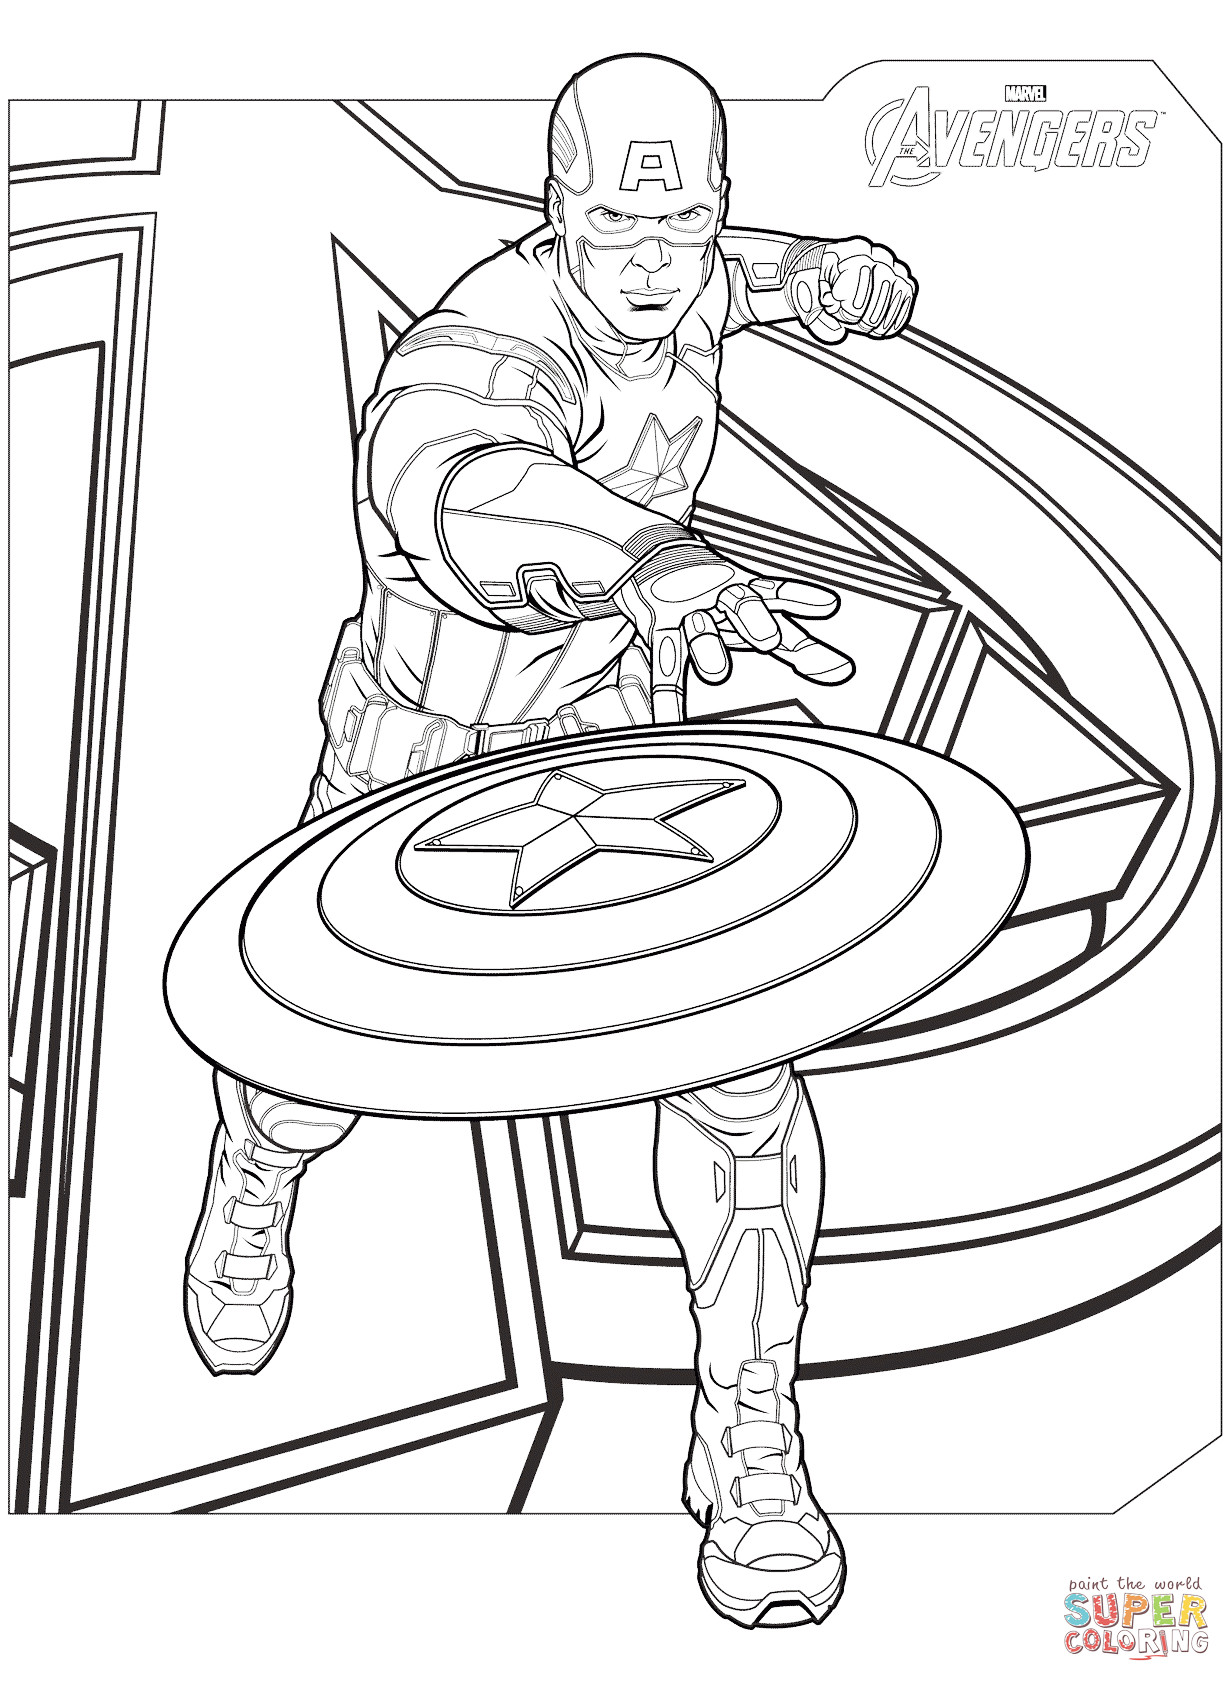 The Avengers Coloring Pages
 Avengers Captain America coloring page